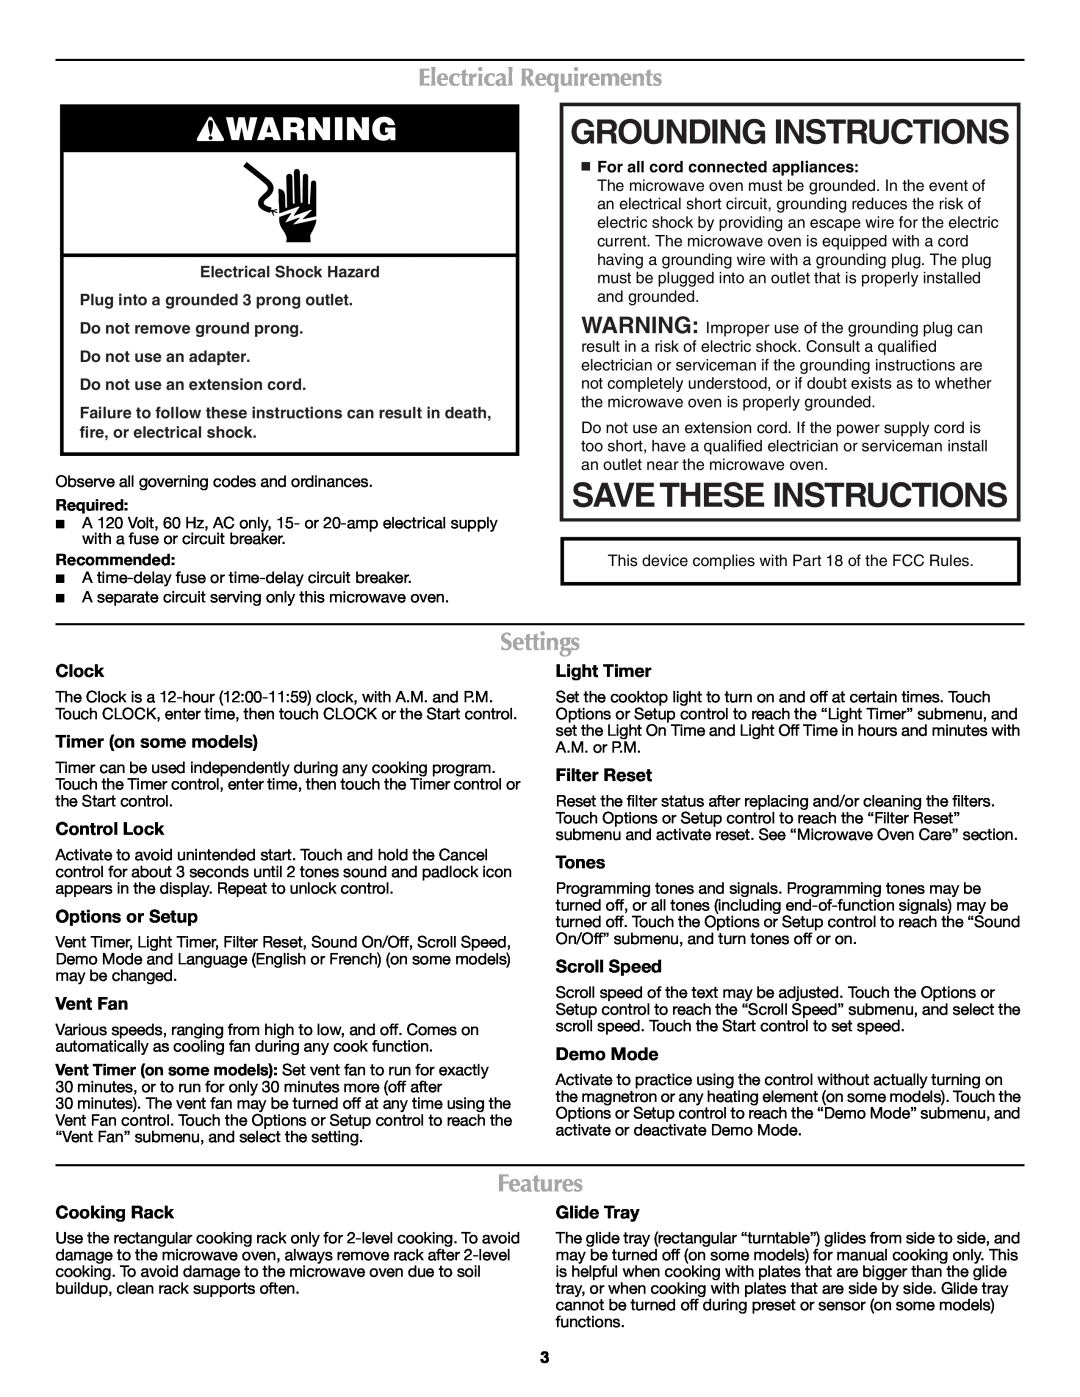 Maytag W10336688A Grounding Instructions, Electrical Requirements, Settings, Features, Clock, Timer on some models, Tones 